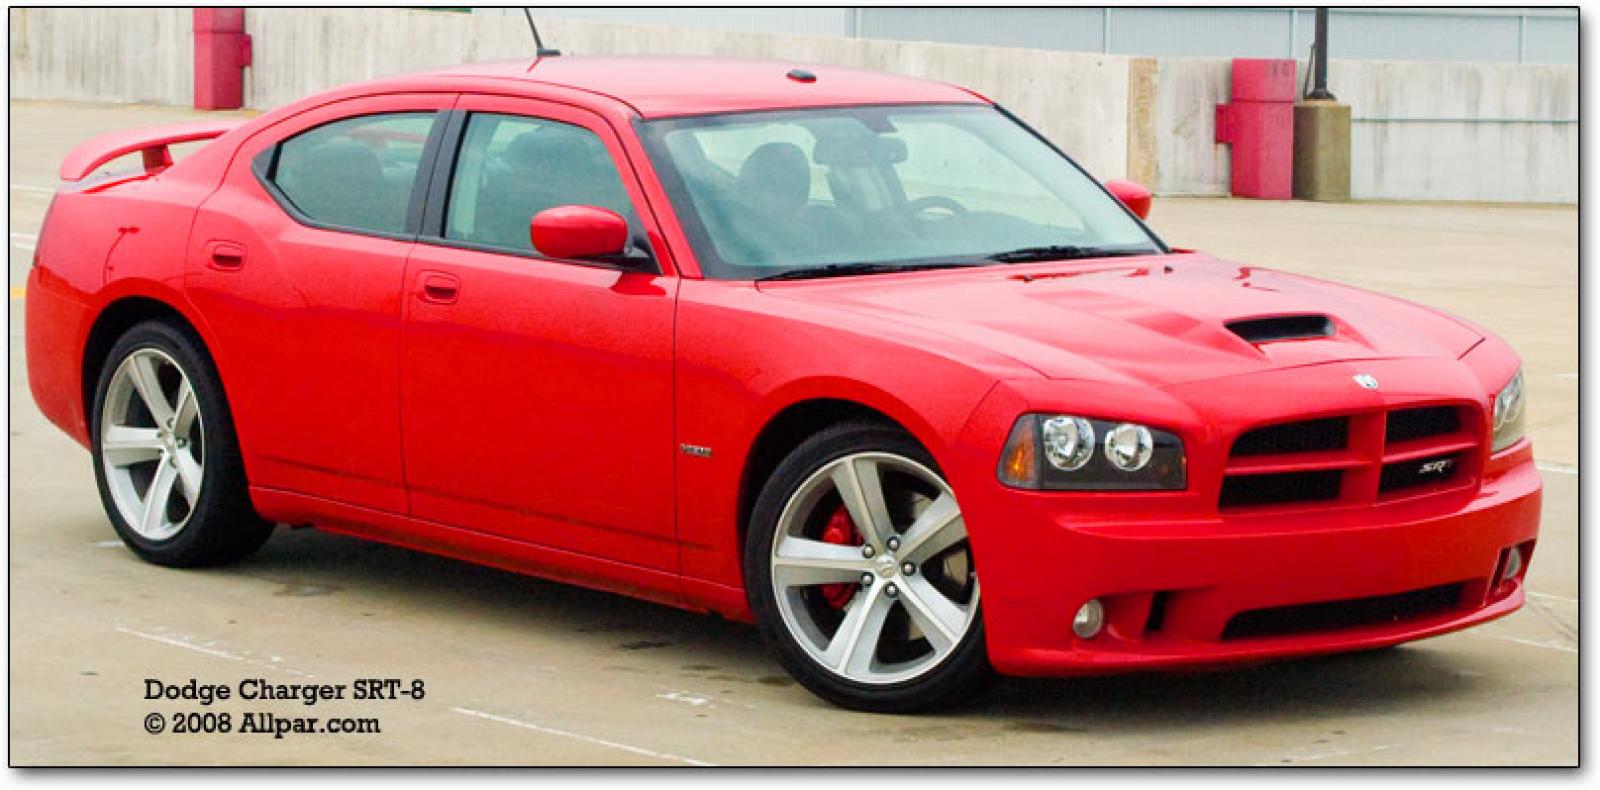 Dodge Charger #12 - size 1600.